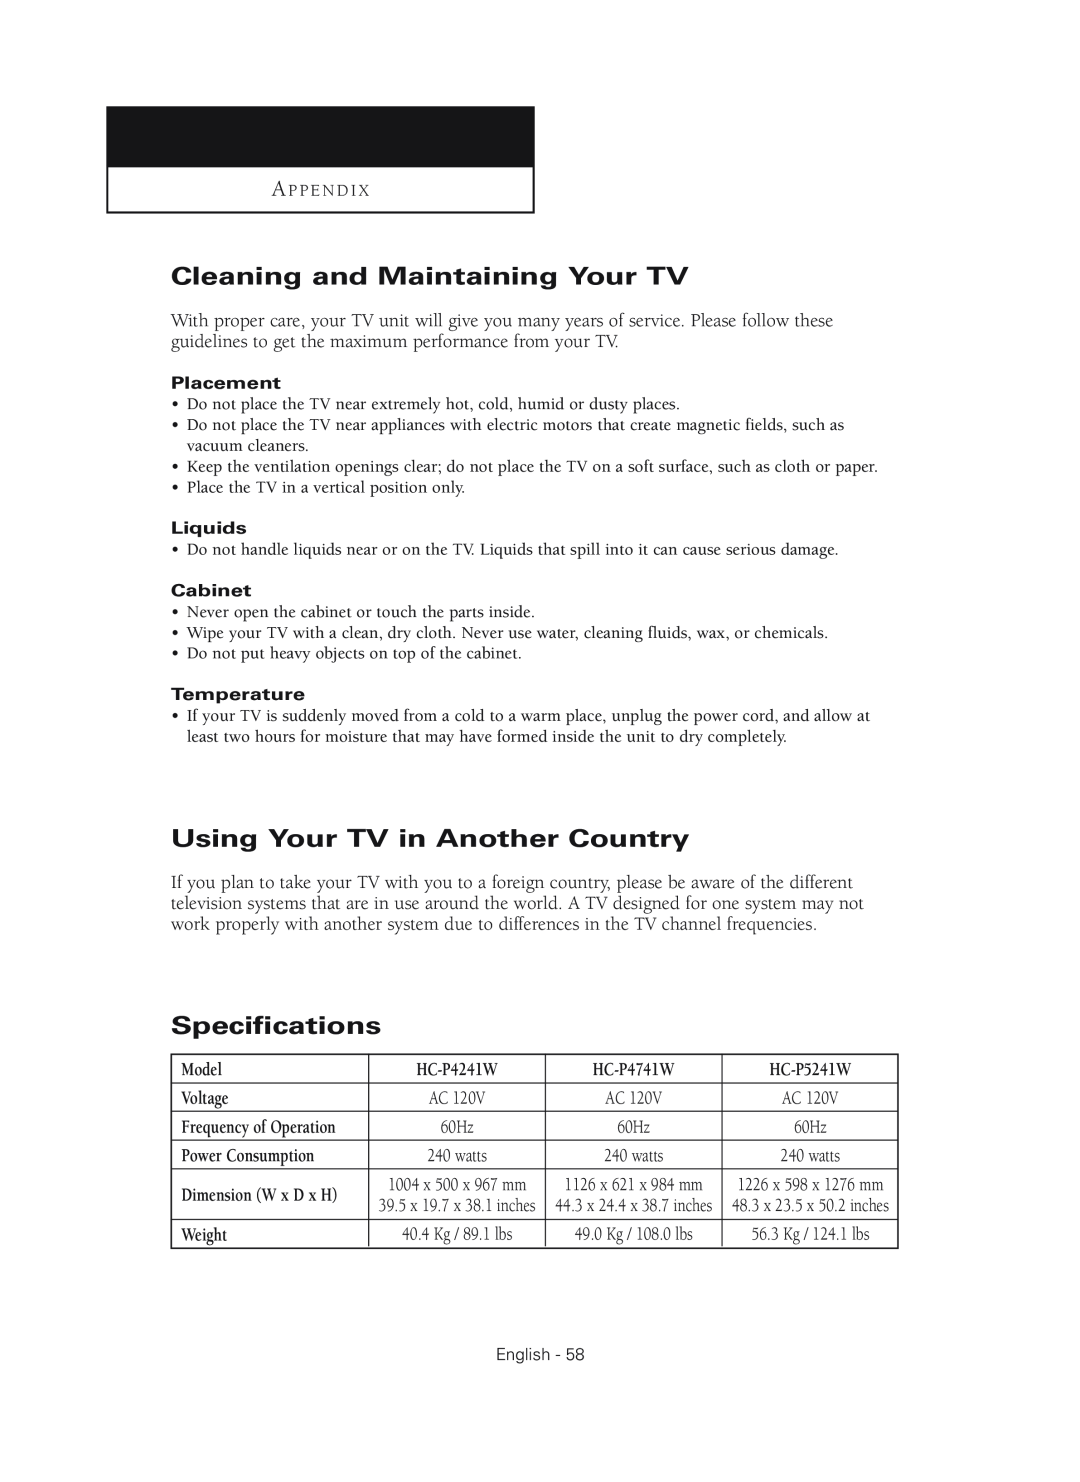 Samsung HC-P4241W Cleaning and Maintaining Your TV, Using Your TV in Another Country, Specifications, Model, HC-P4741W 